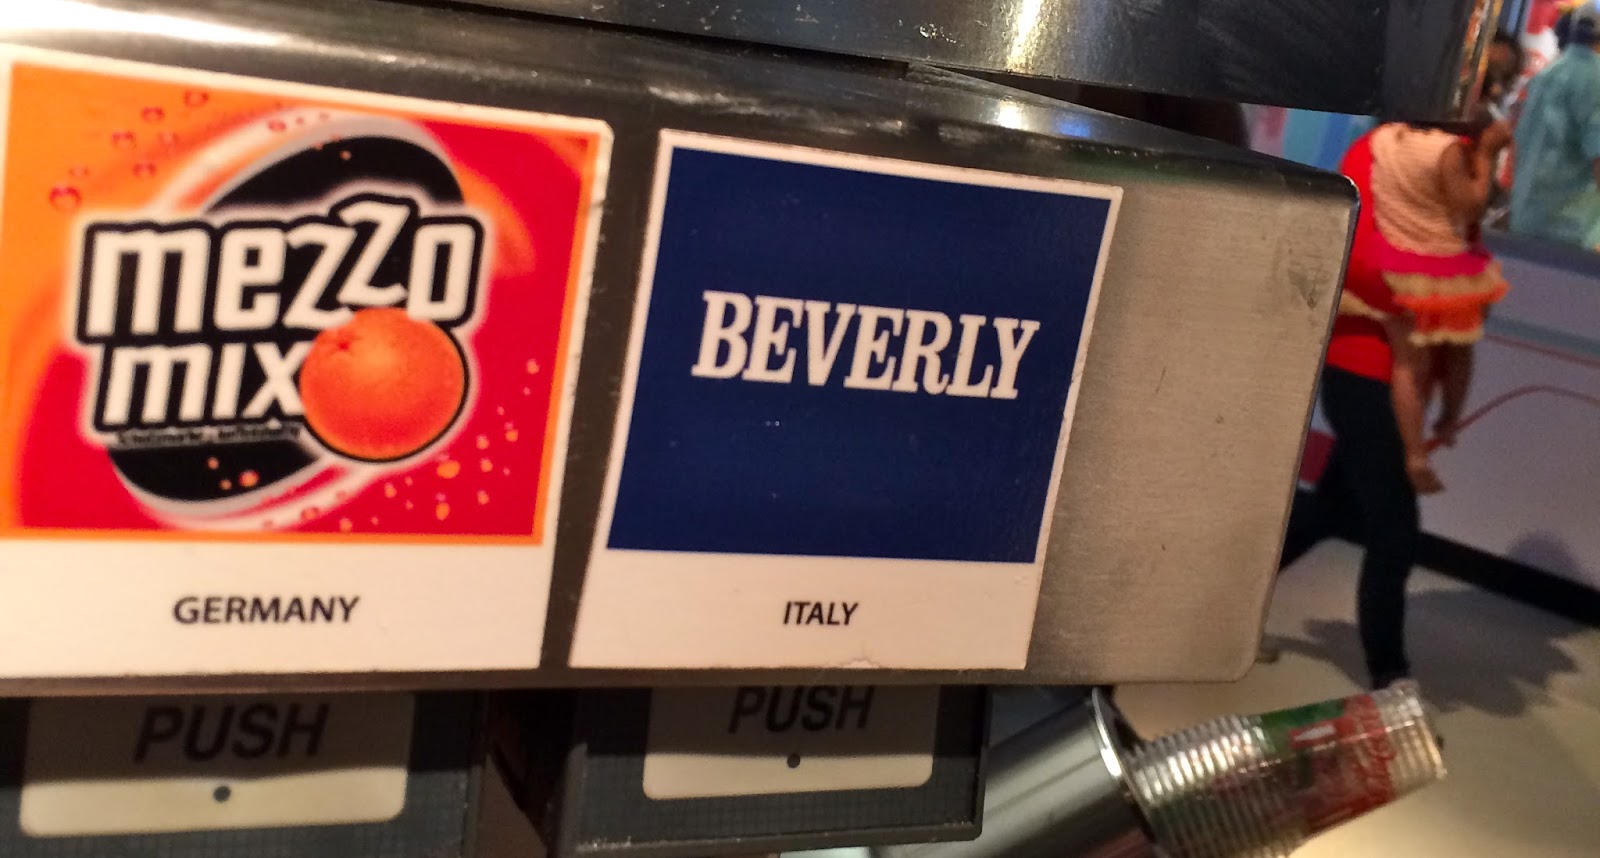 Try the Beverly from Italy... it's the "BEST" flavor in the world! :) World of Coke Summer 2014